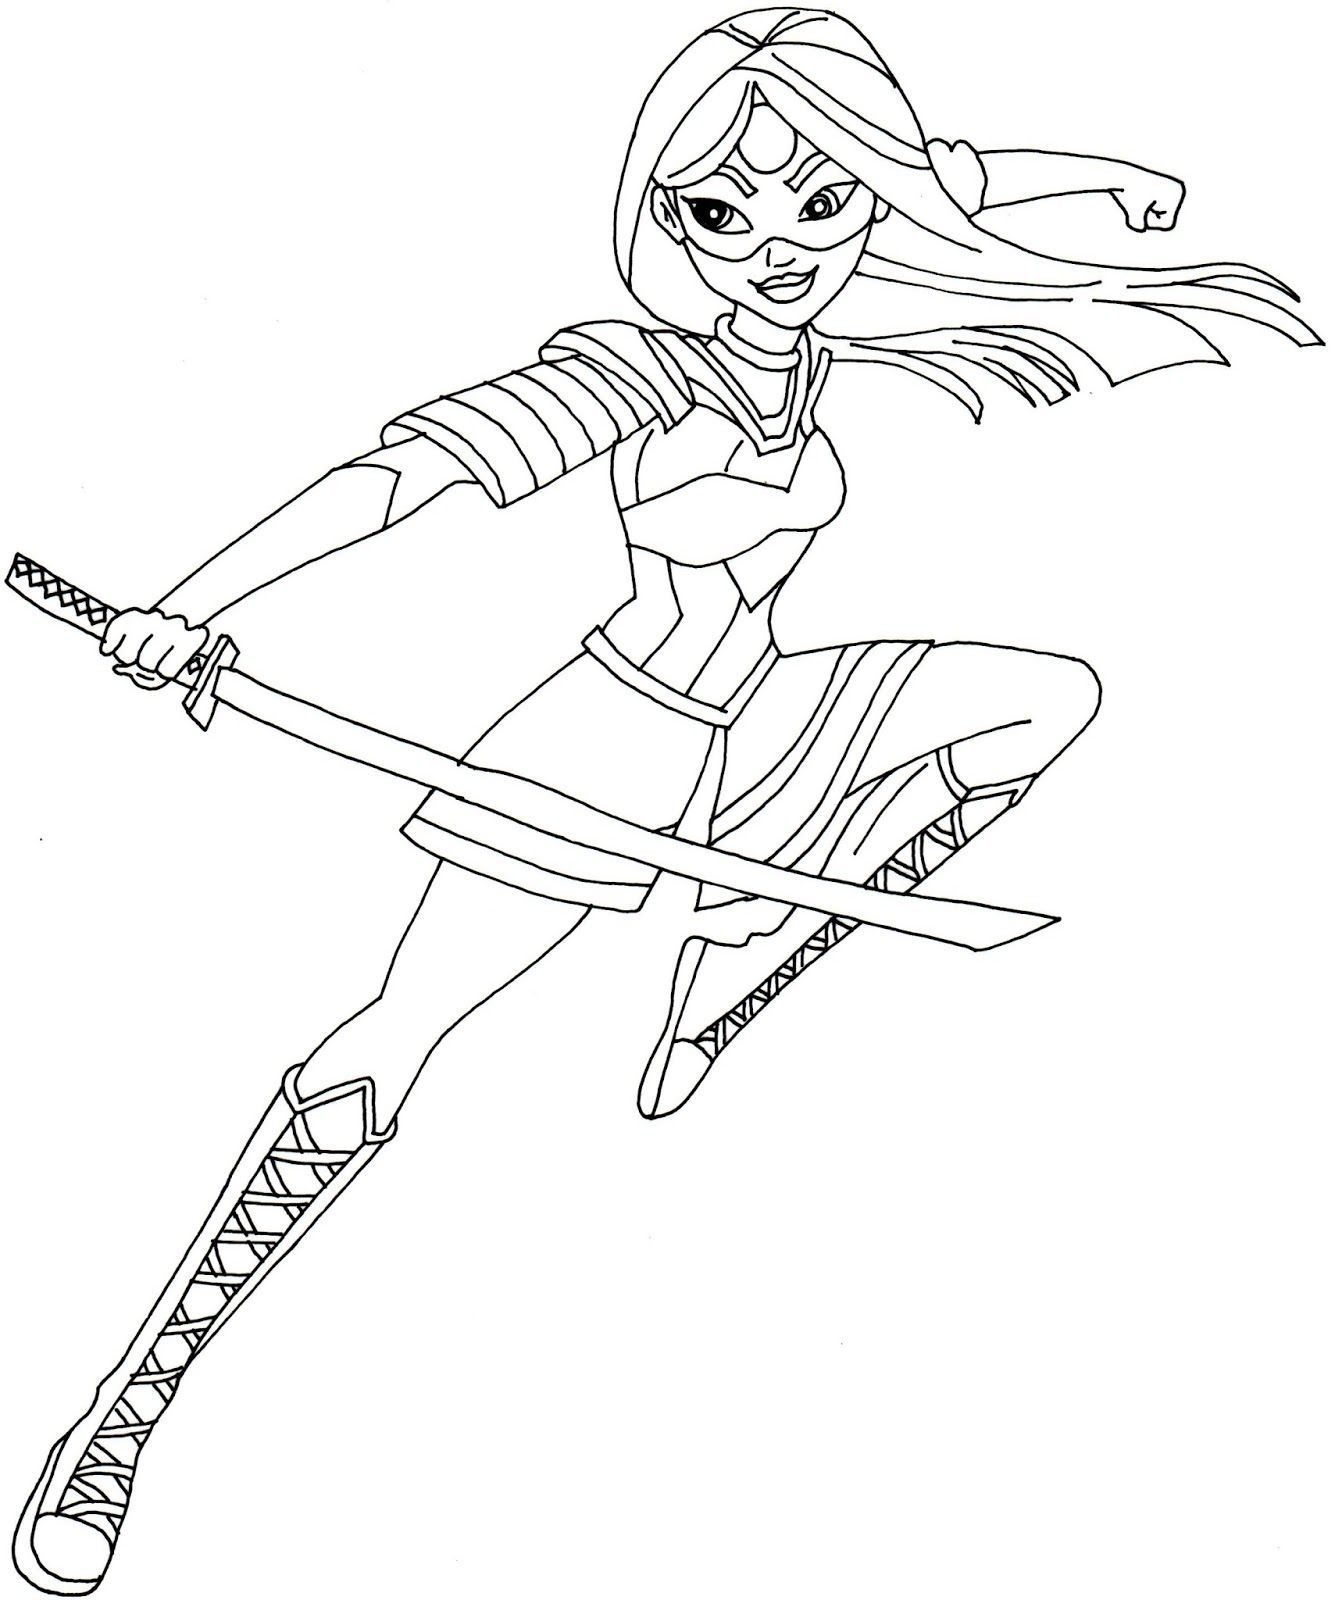 Free Printable Coloring Page for Dc Super Hero Girls Supergirl ... | Superhero  coloring pages, Superhero coloring, Super hero coloring sheets